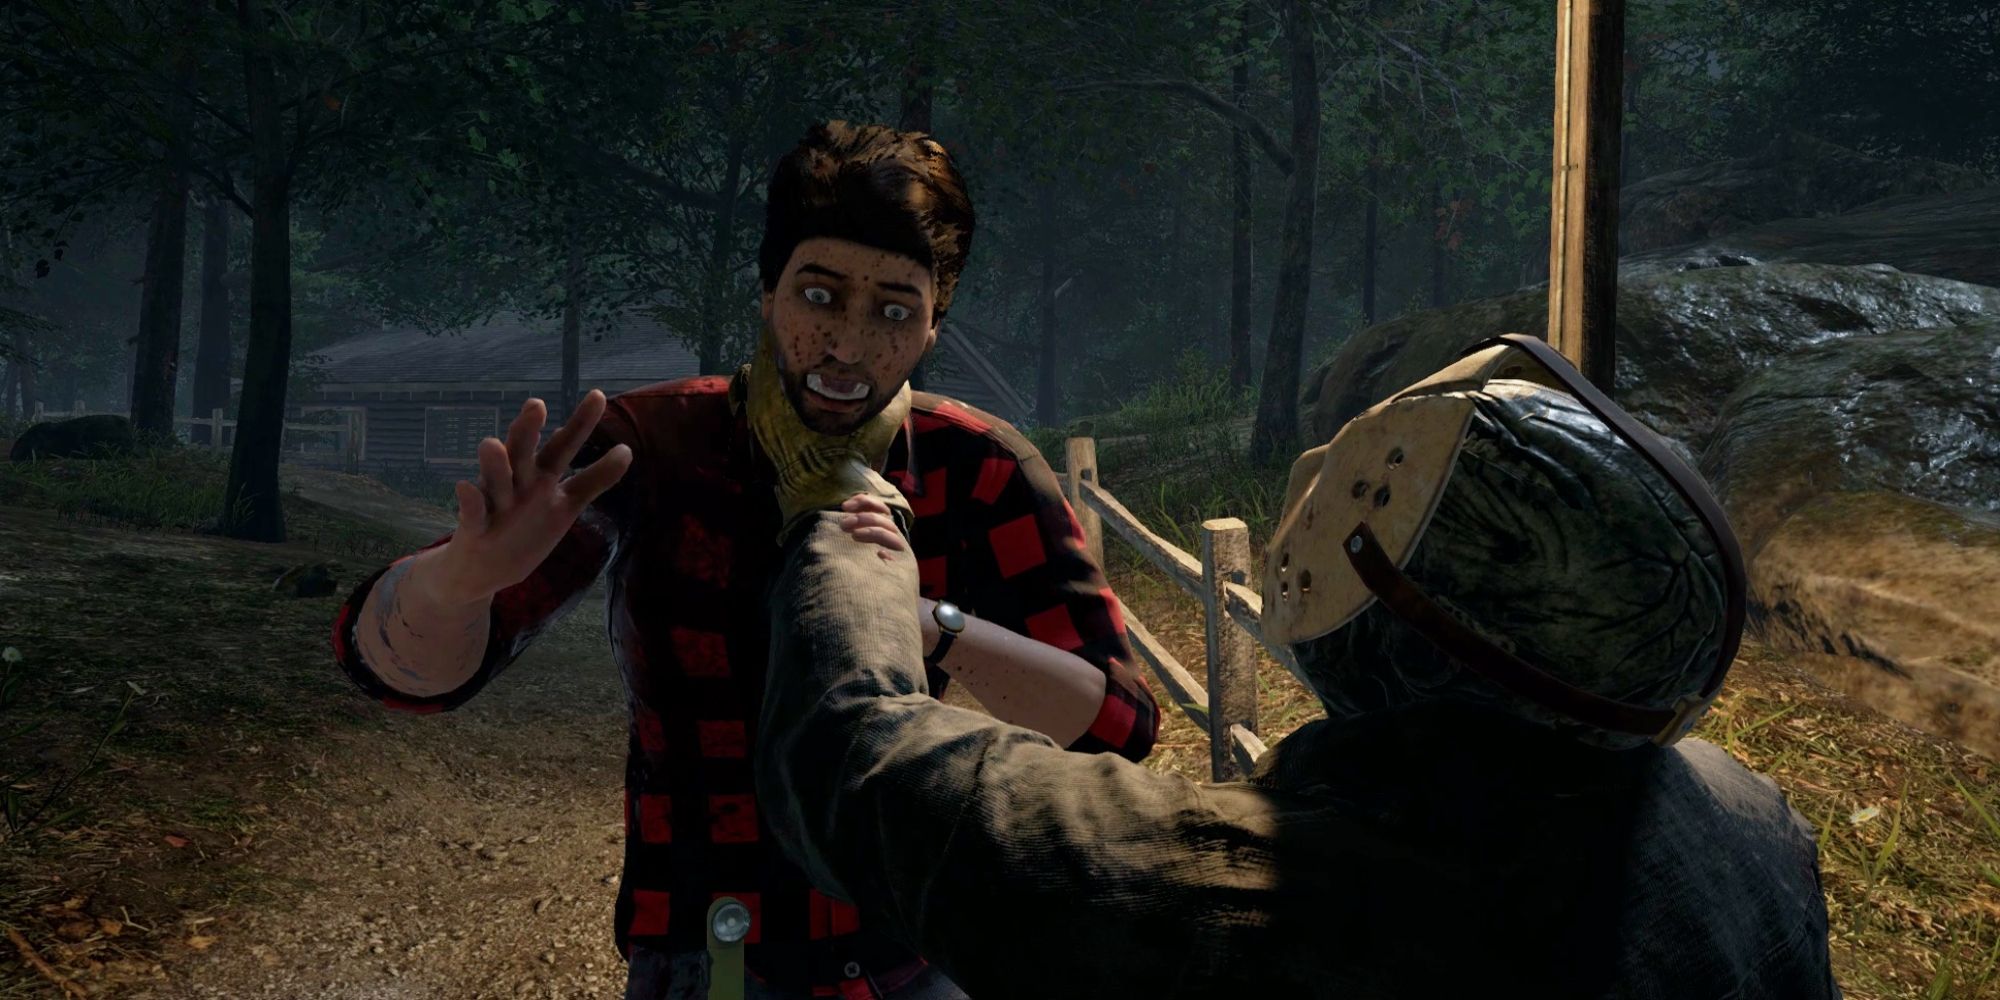 Jason Vorhees grabbing a counselor in Friday the 13th The Game